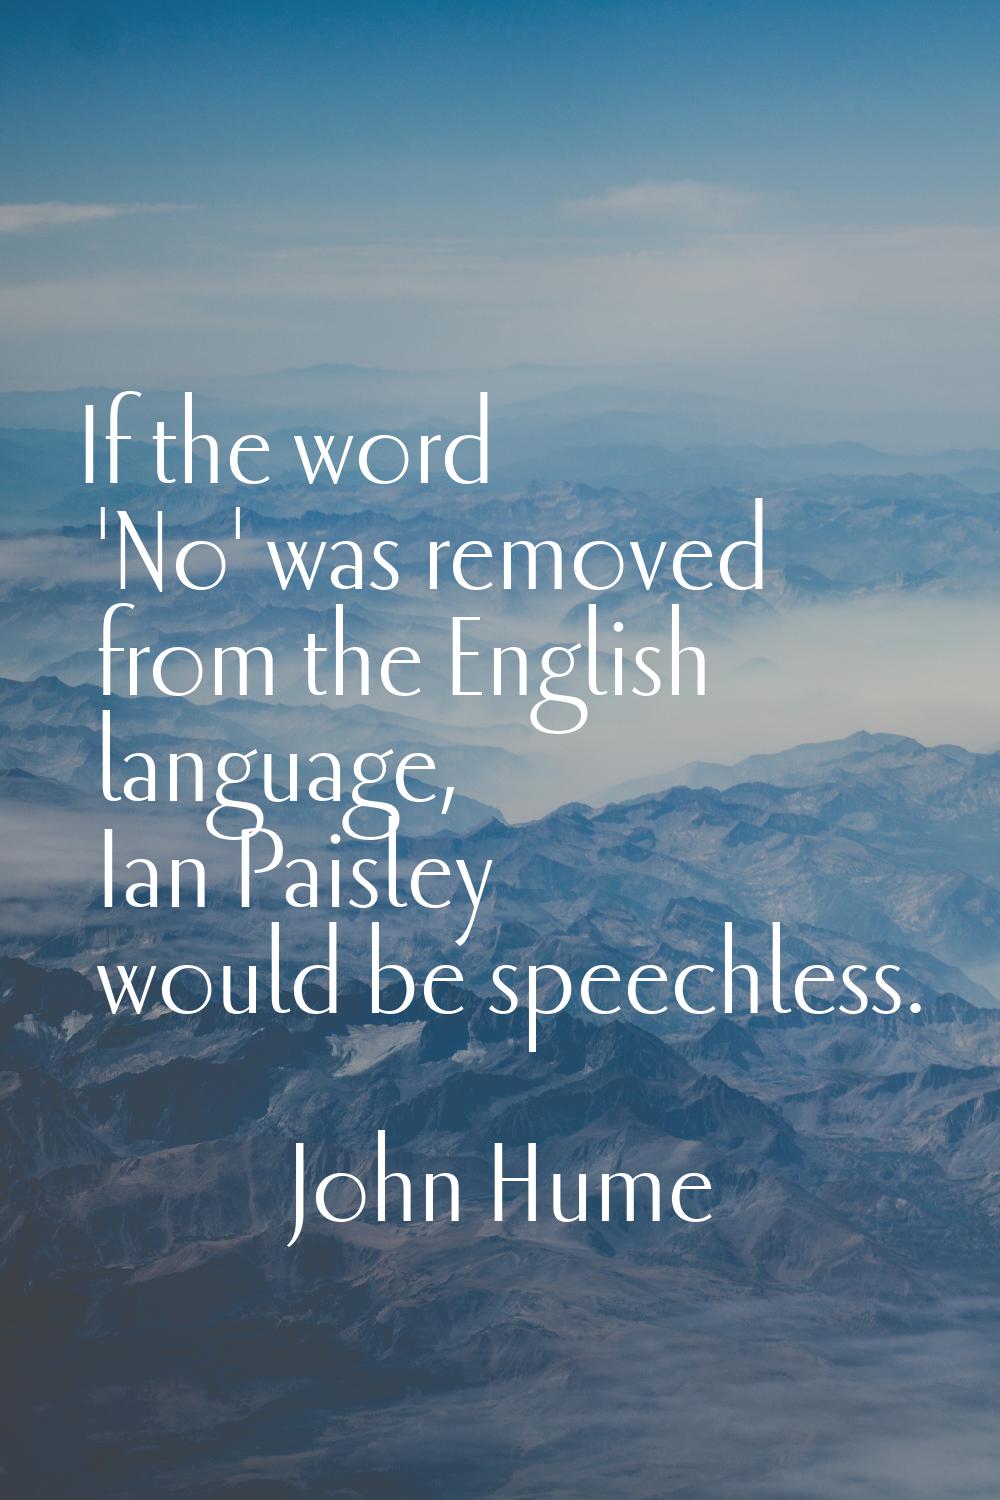 If the word 'No' was removed from the English language, Ian Paisley would be speechless.